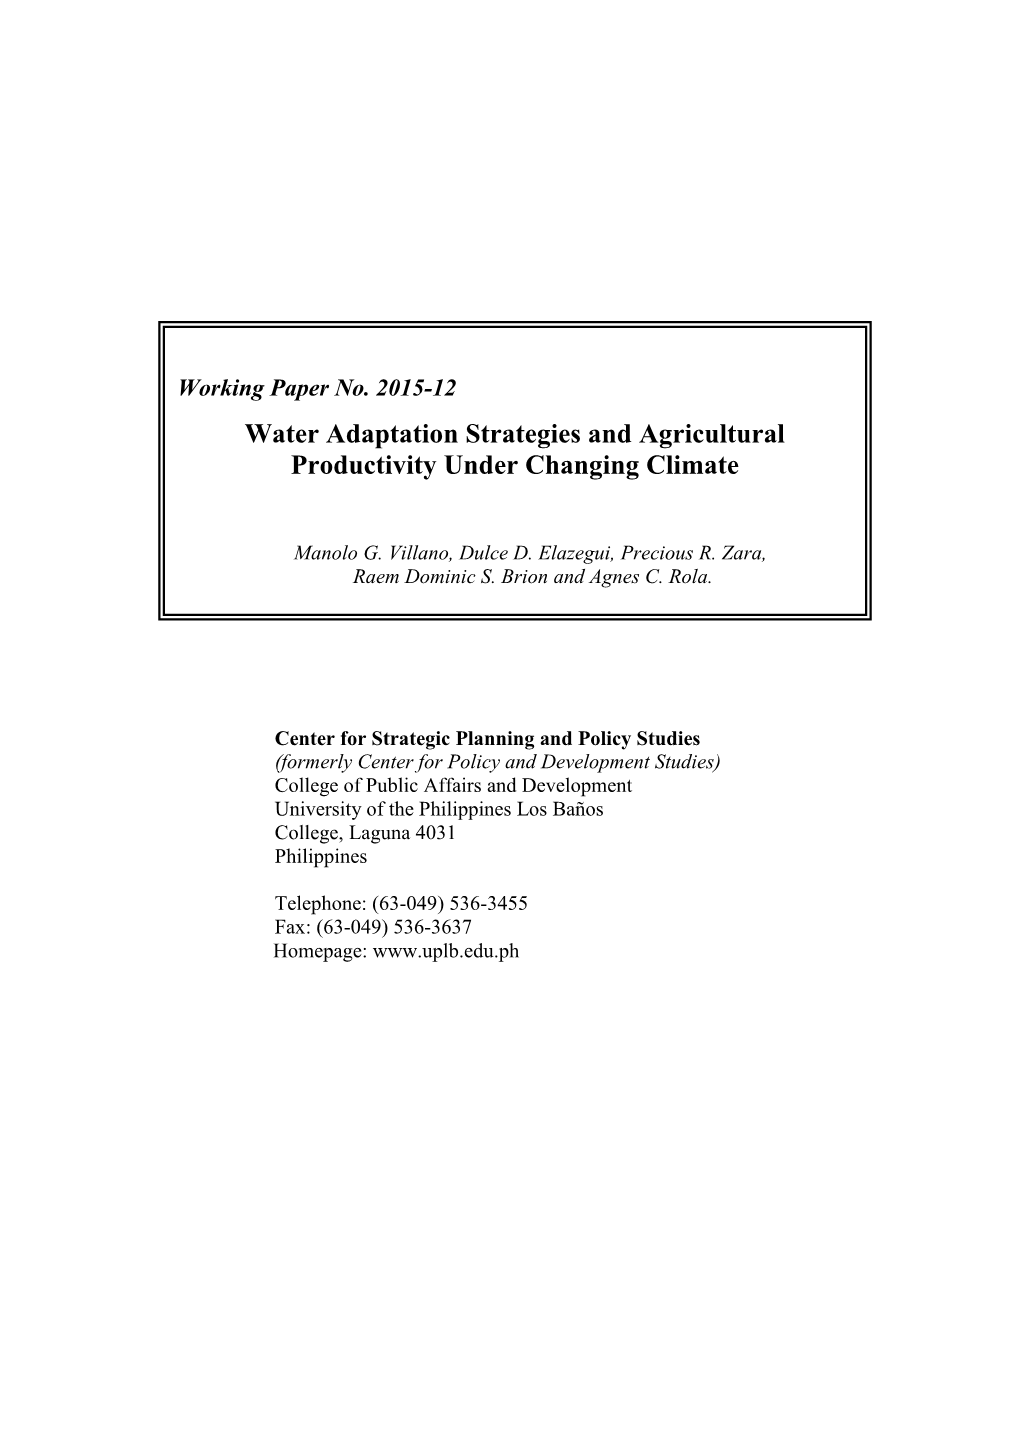 Water Adaptation Strategies and Agricultural Productivity Under Changing Climate